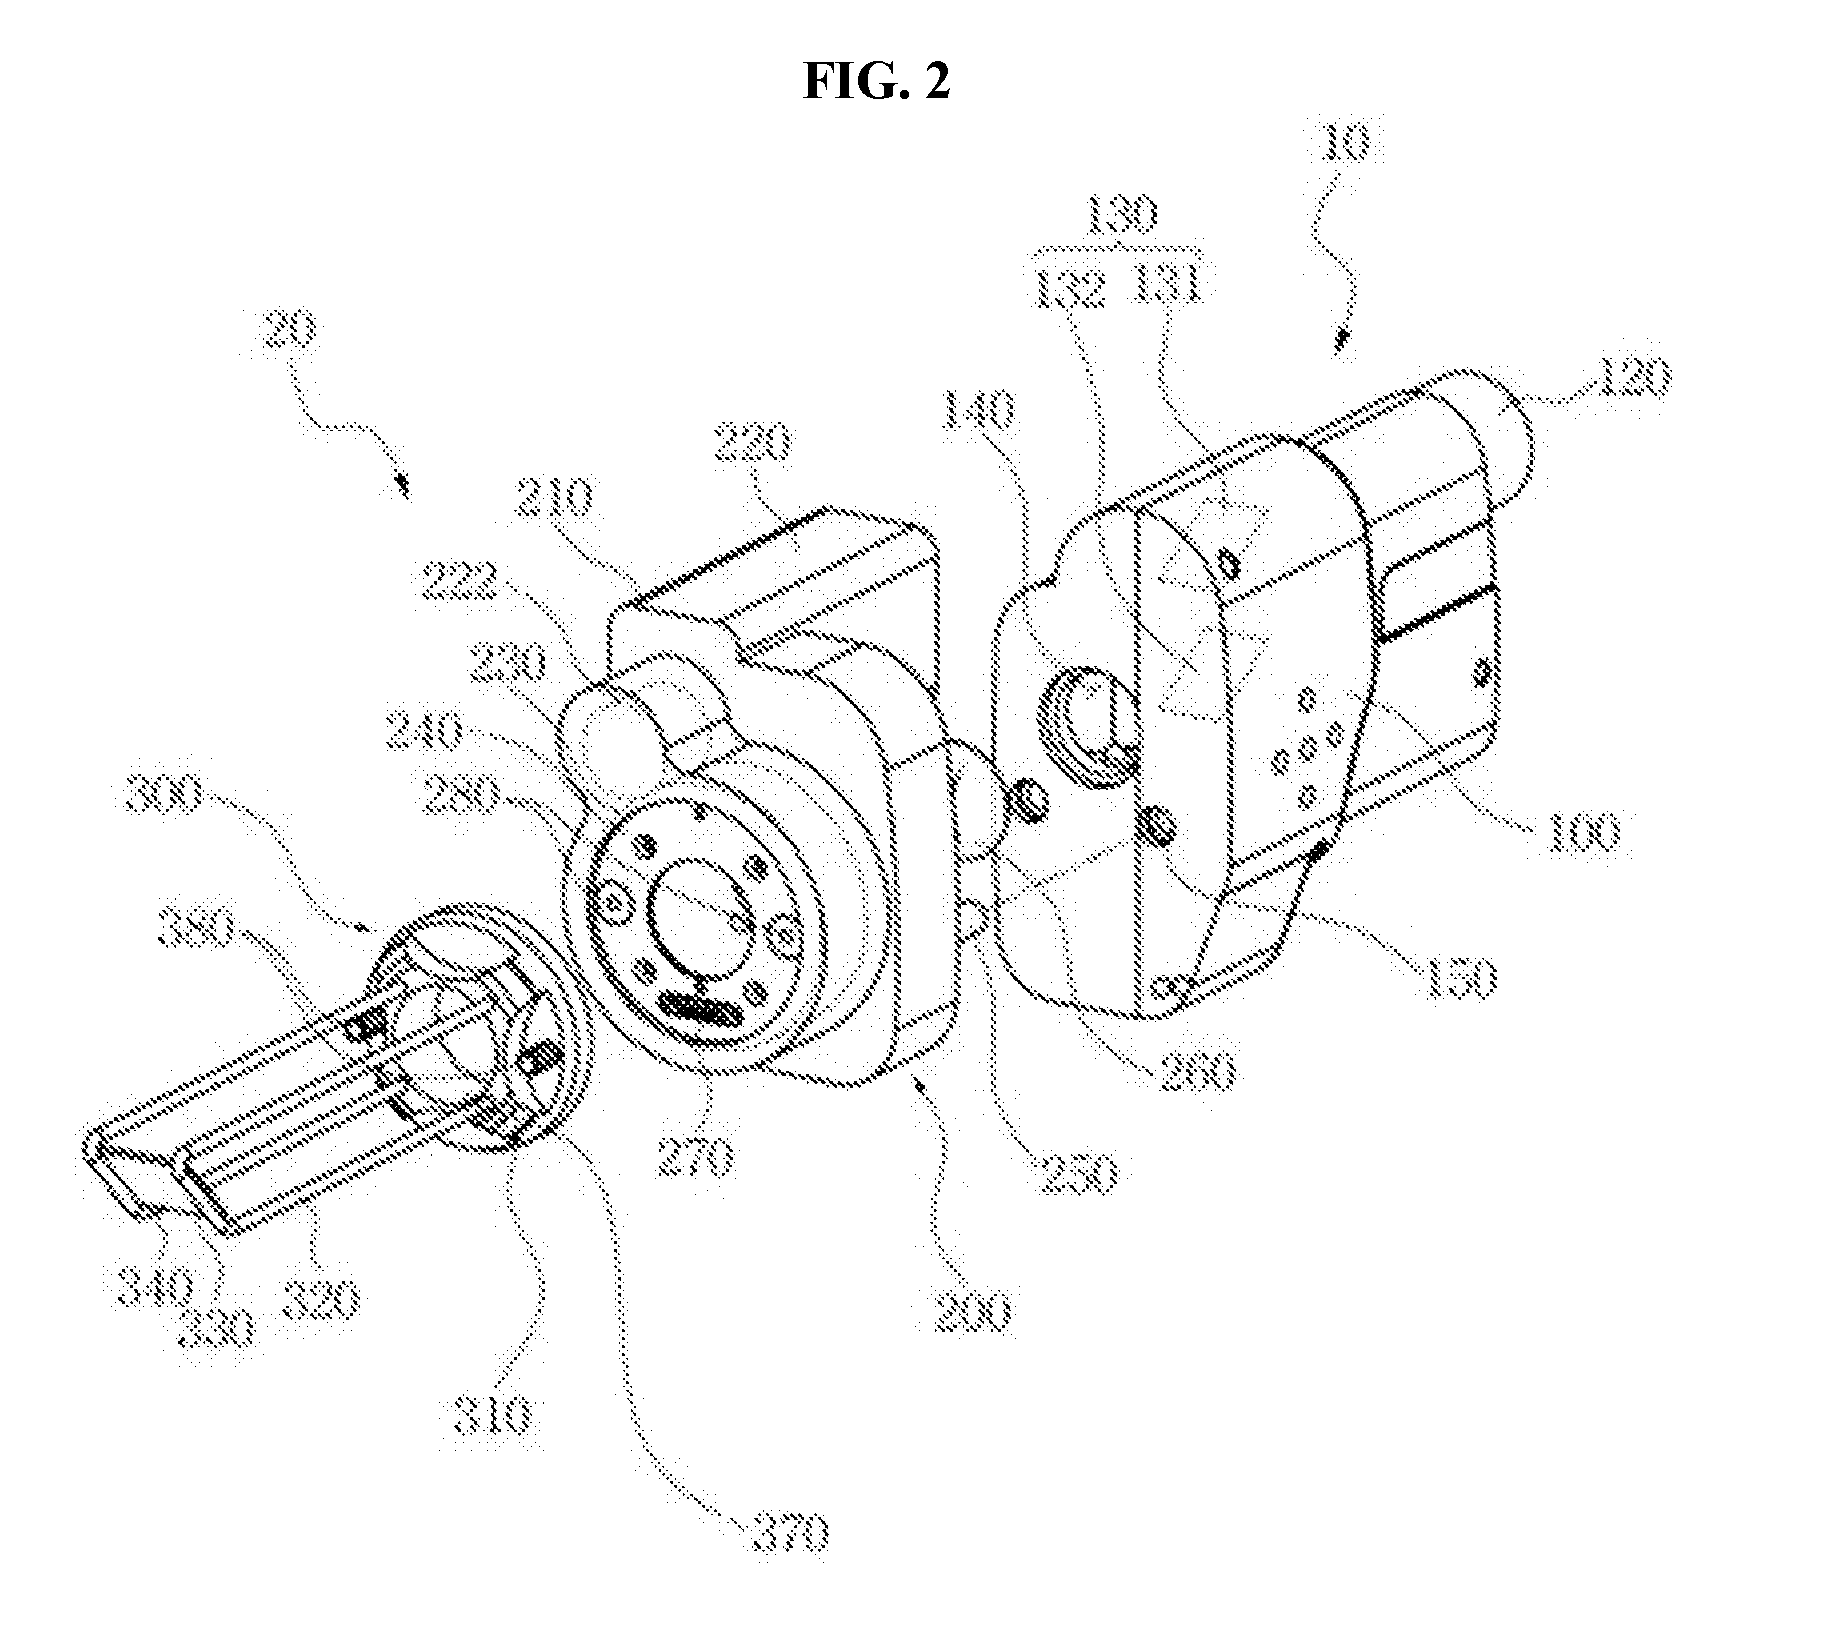 Fractional laser surgical equipment having multiple purposes including treatment of vagina